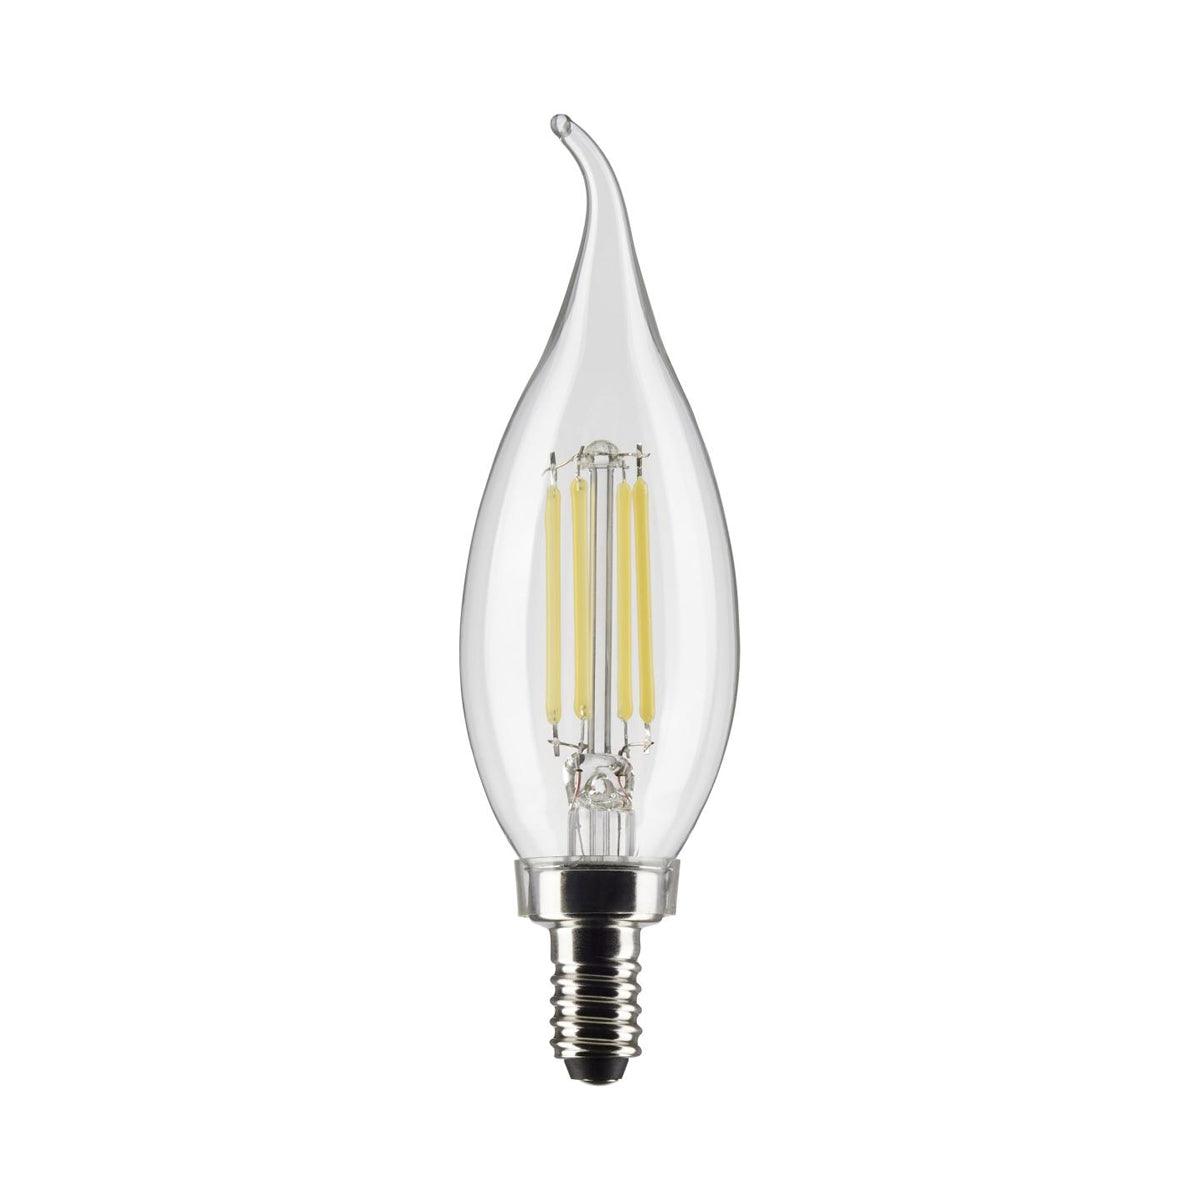 CA10 Candle LED Bulb, 40W Equivalent,4 Watt, 350 Lumens, 2700K, E12 Candelabra Base, Clear Finish, Pack Of 2 - Bees Lighting